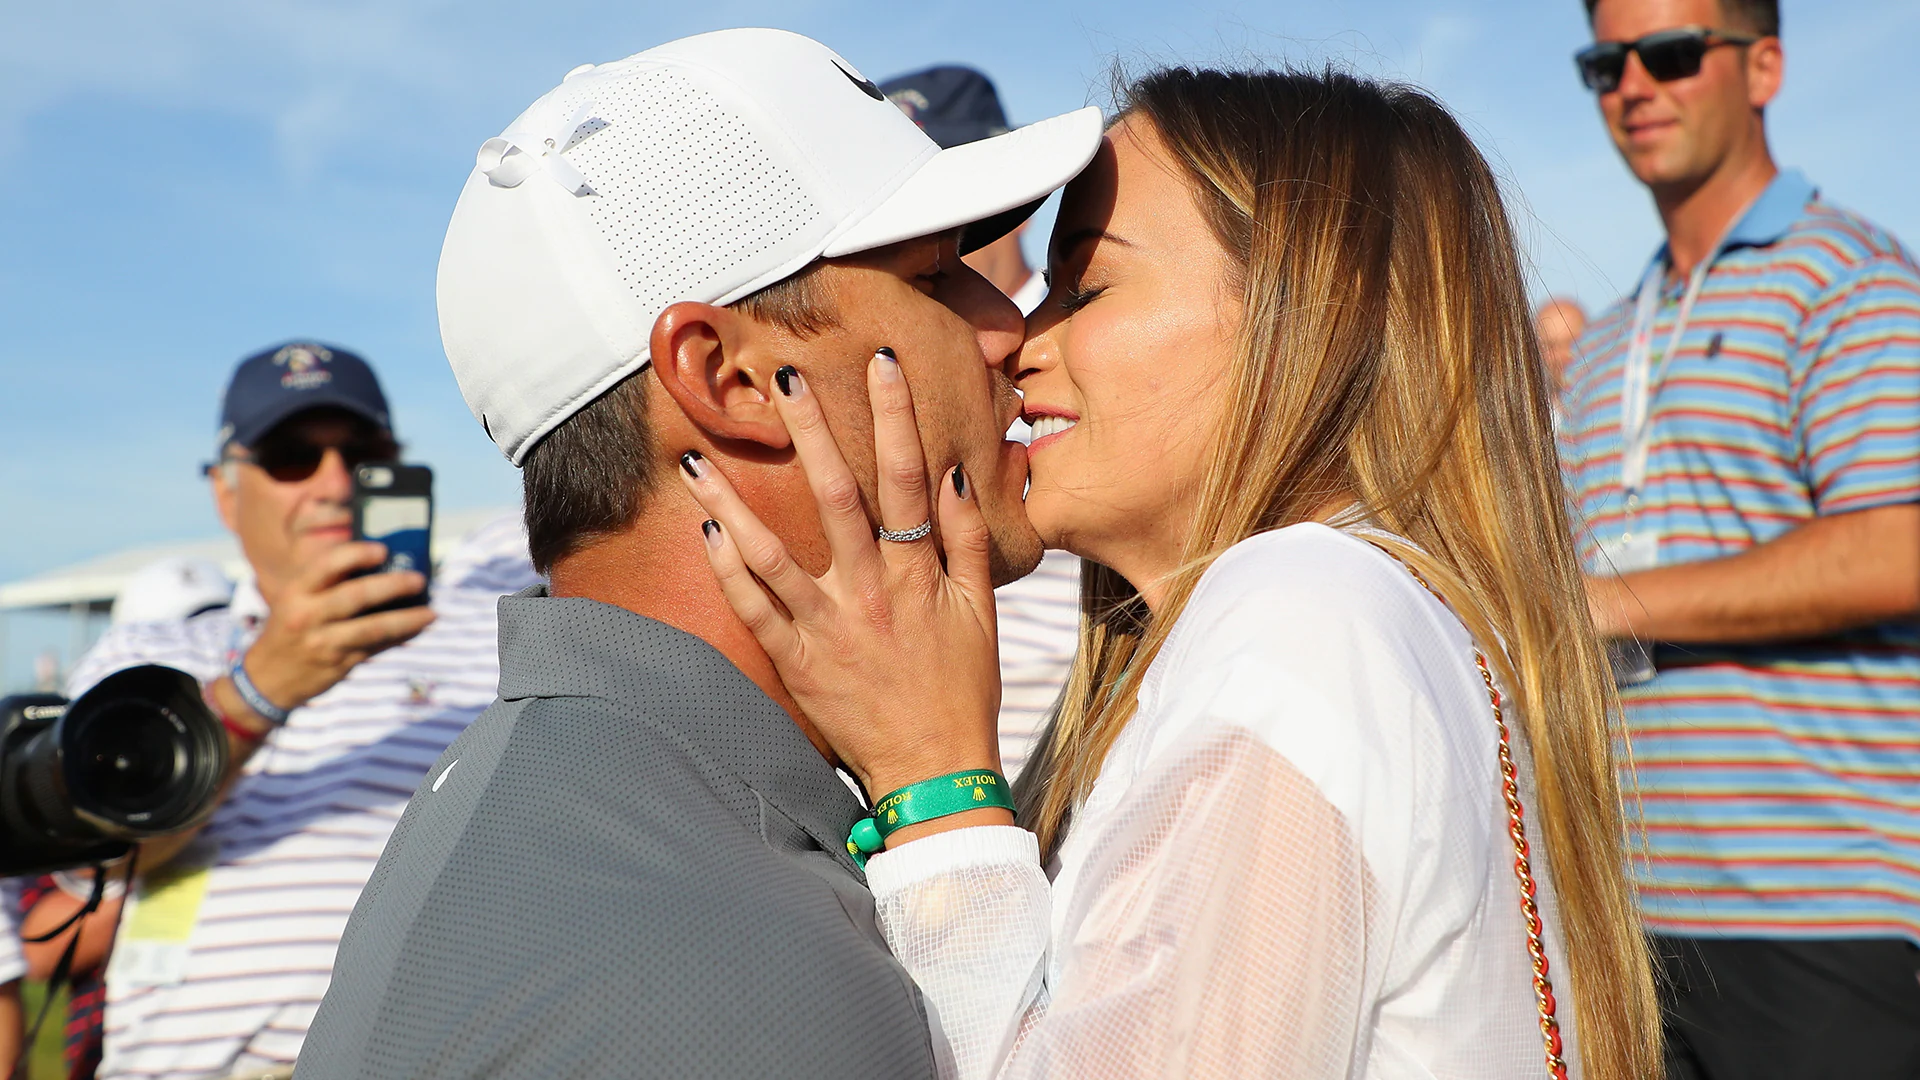 Brooks Koepka, Jena Sims announce engagement … from a nearly a month ago